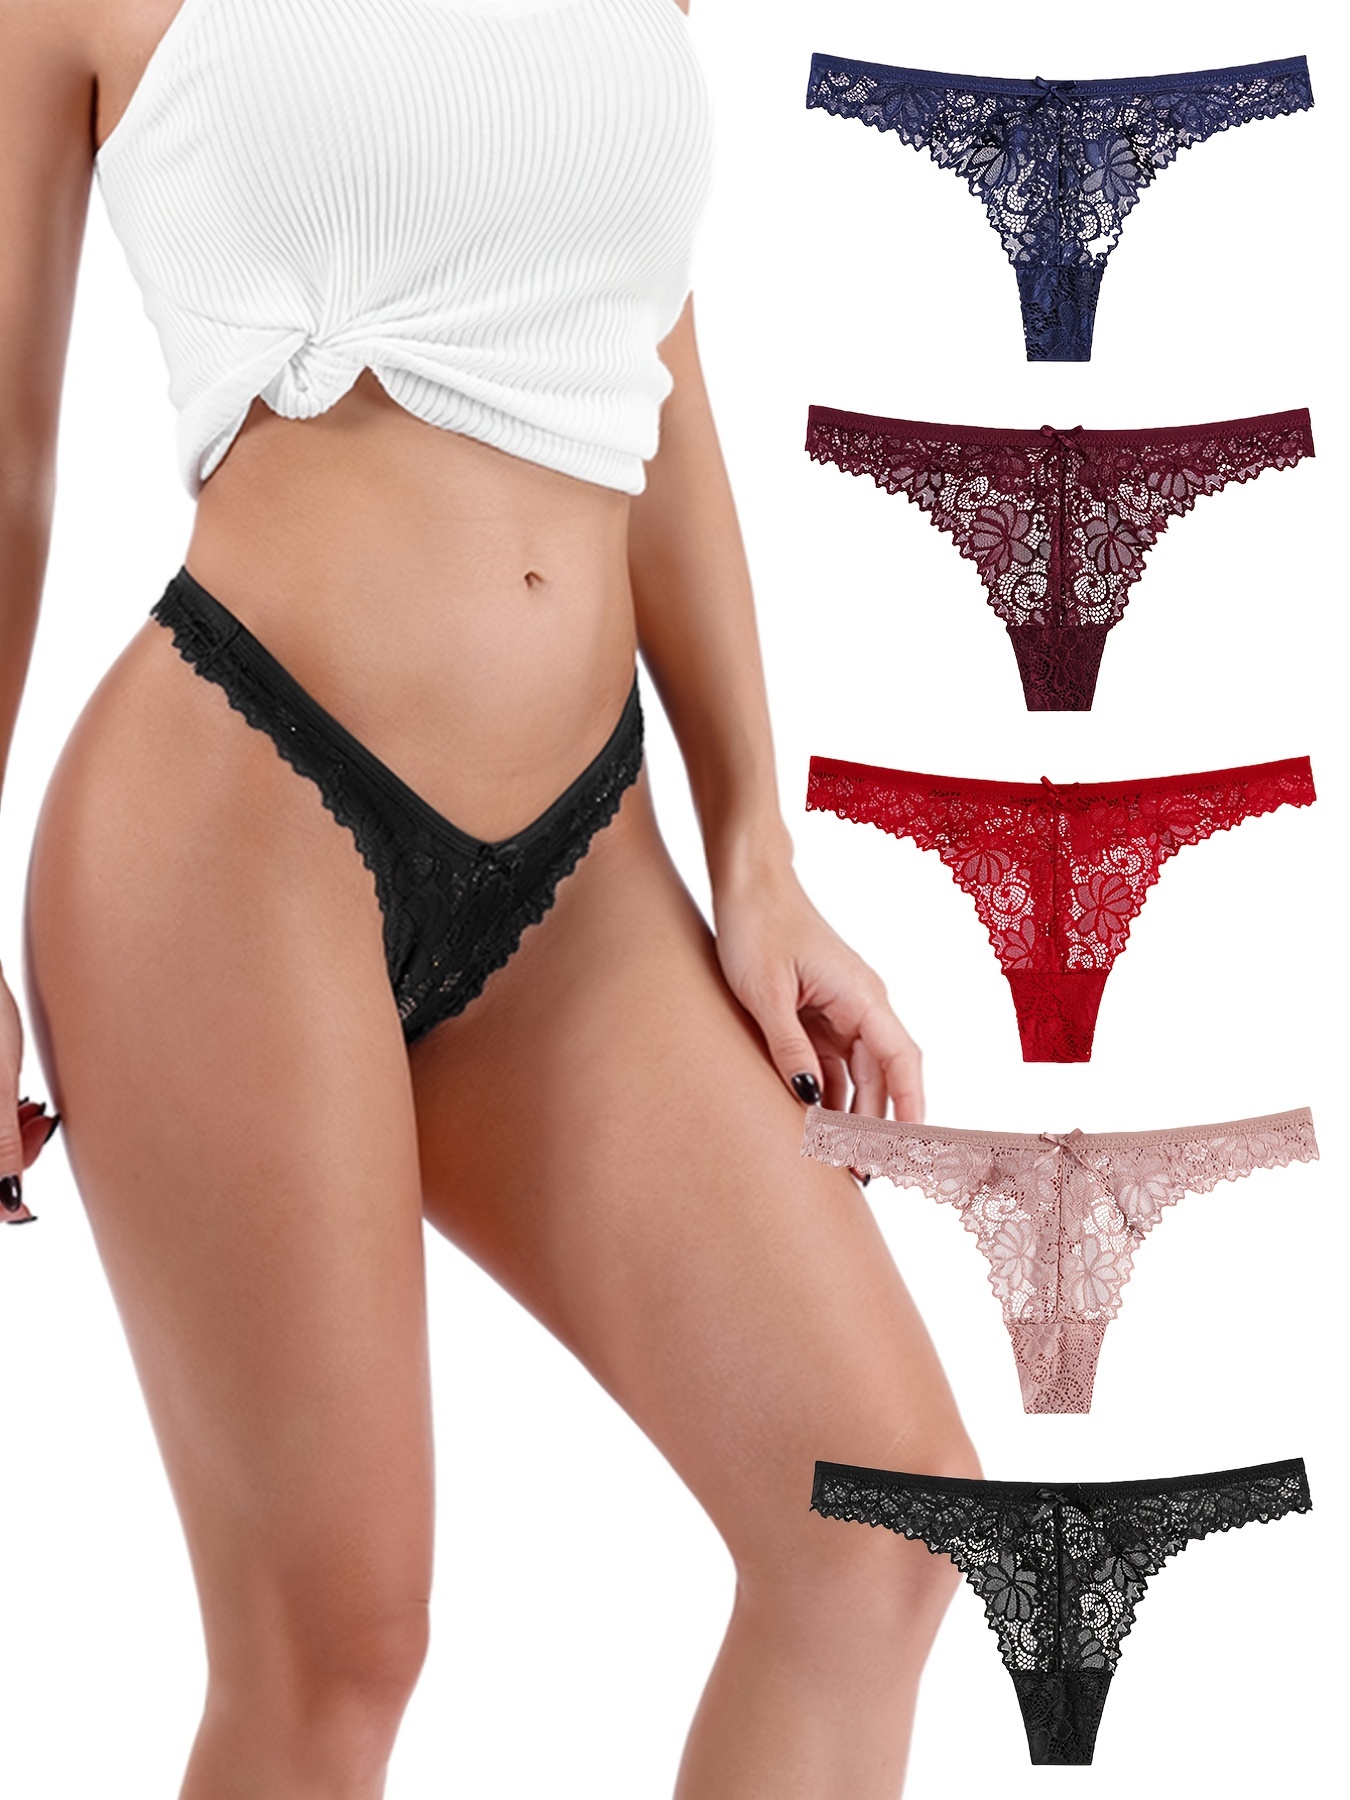 6 x Sexy-Women's-Crotchless-Pearl-Lace-Thongs-Panties-G-String